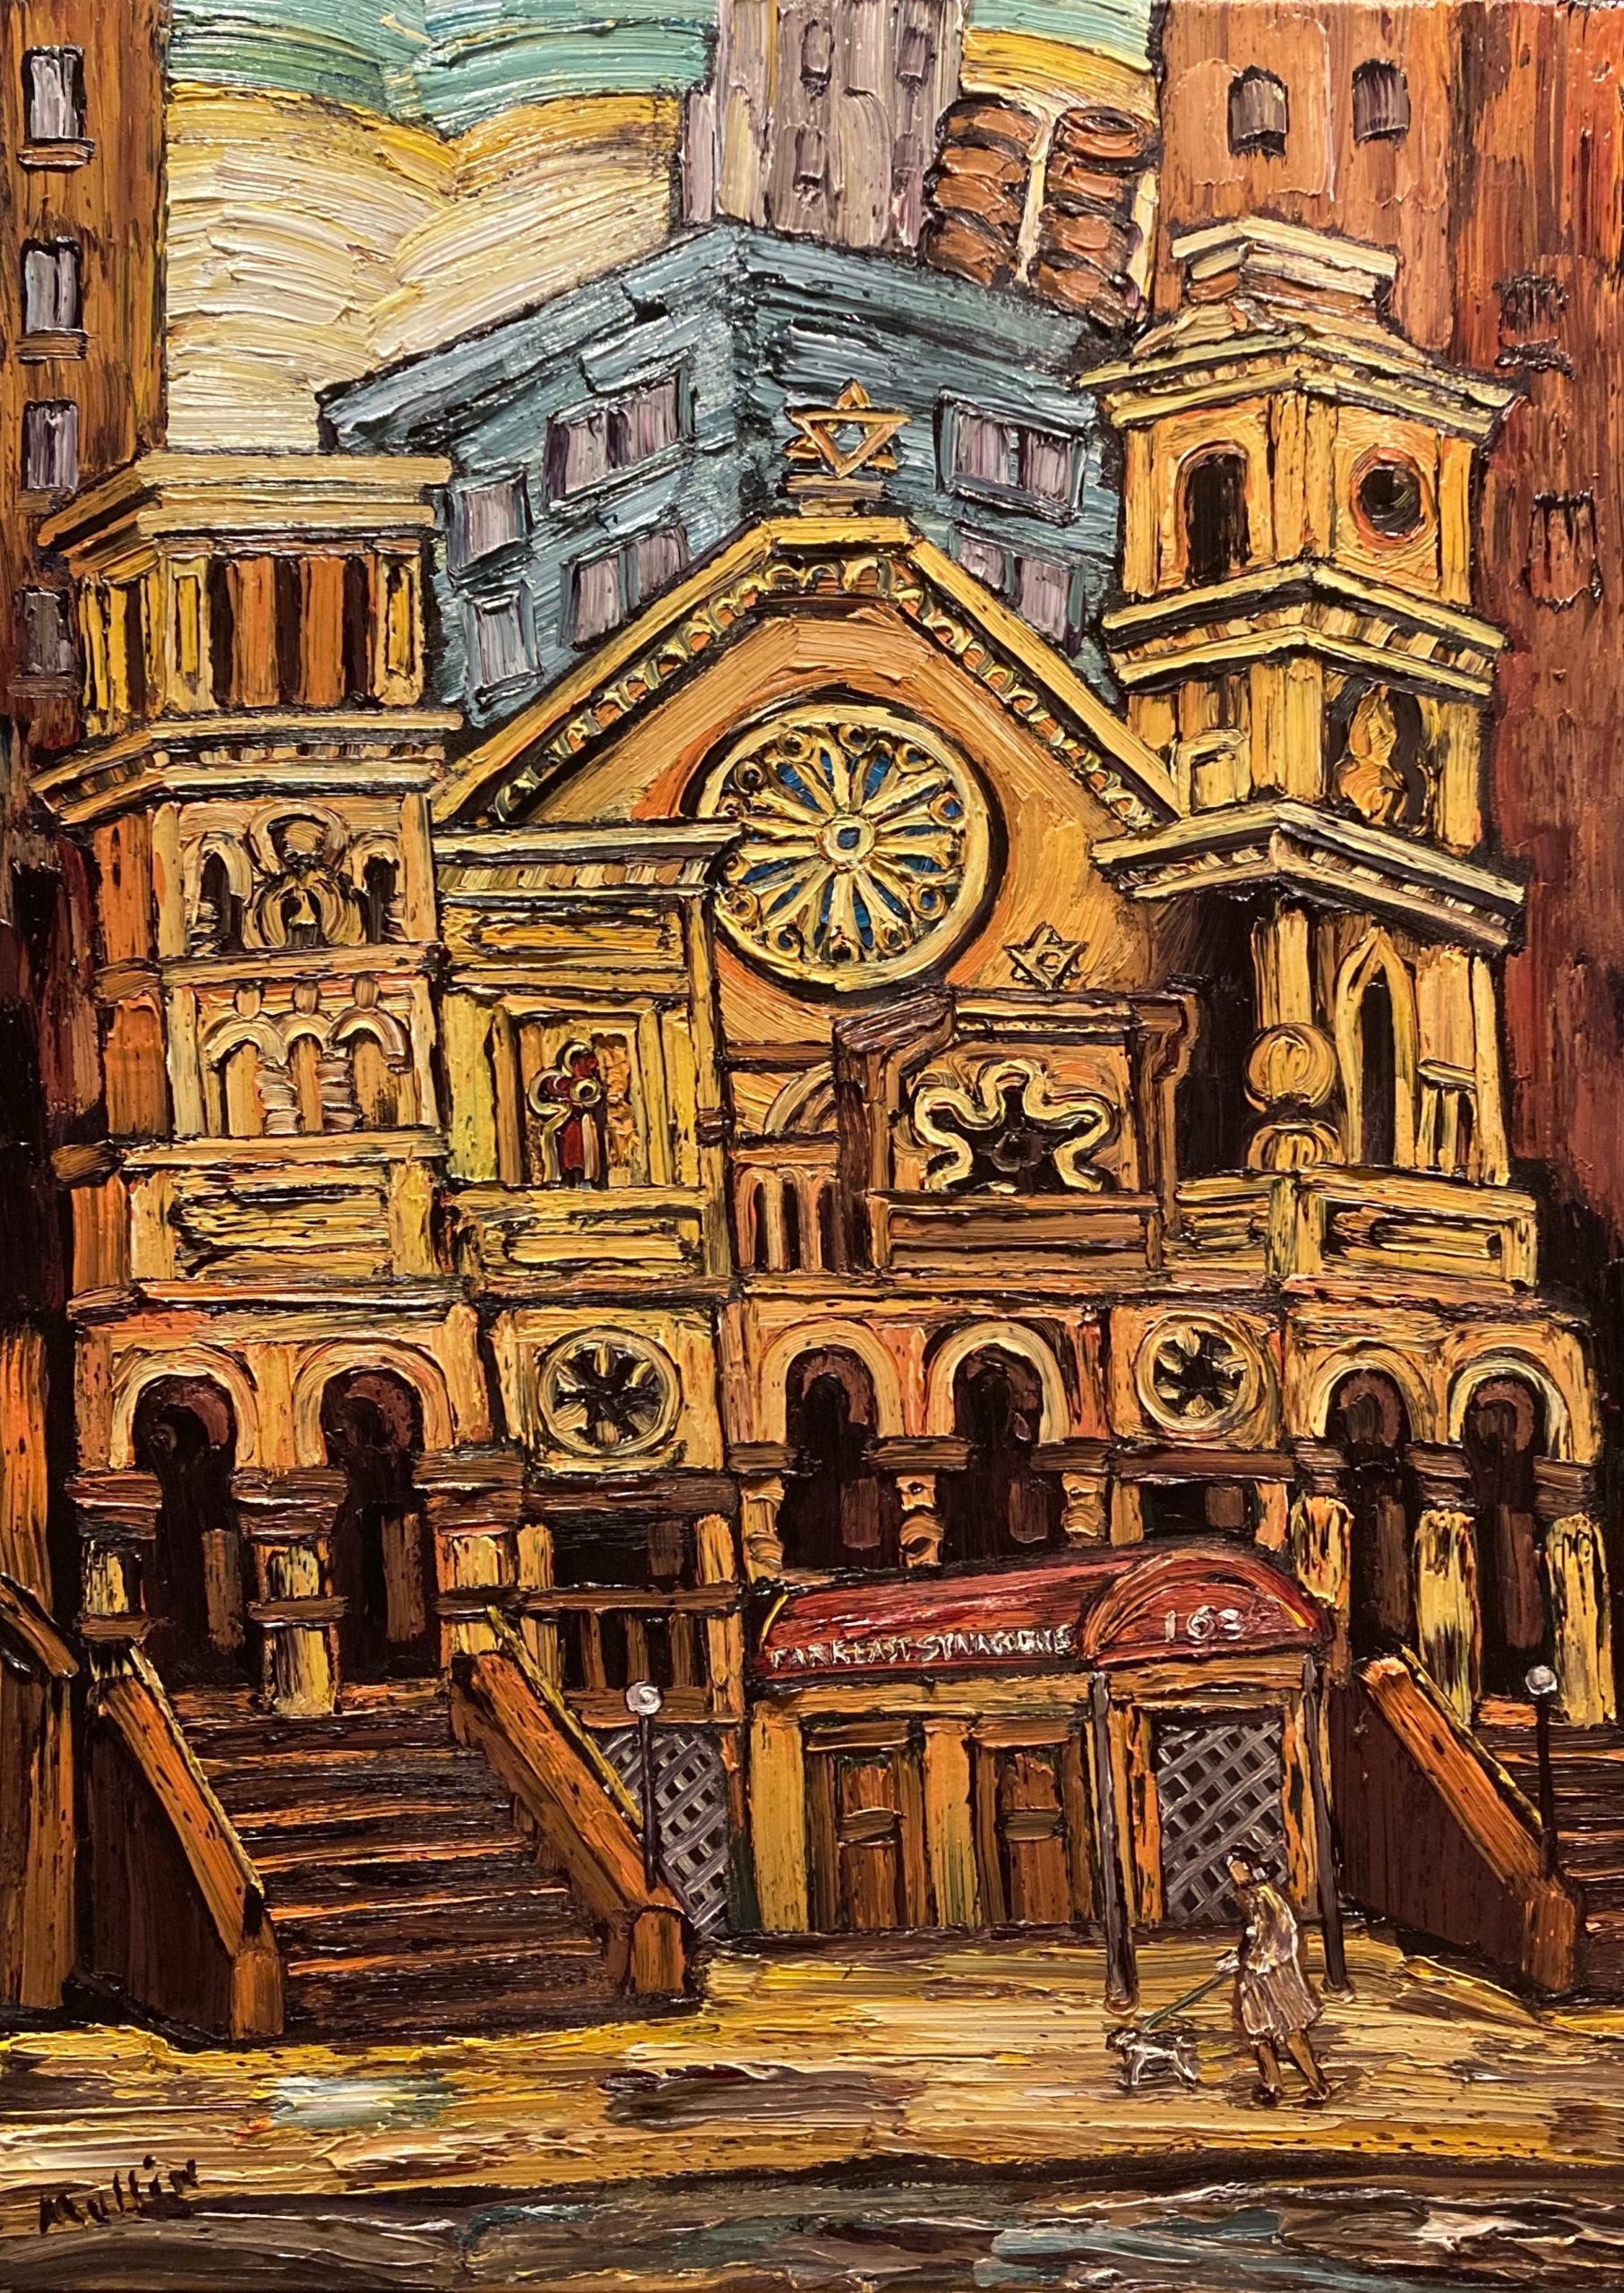 Park East Synagogue. Oil on canvas, 36” x 24”.